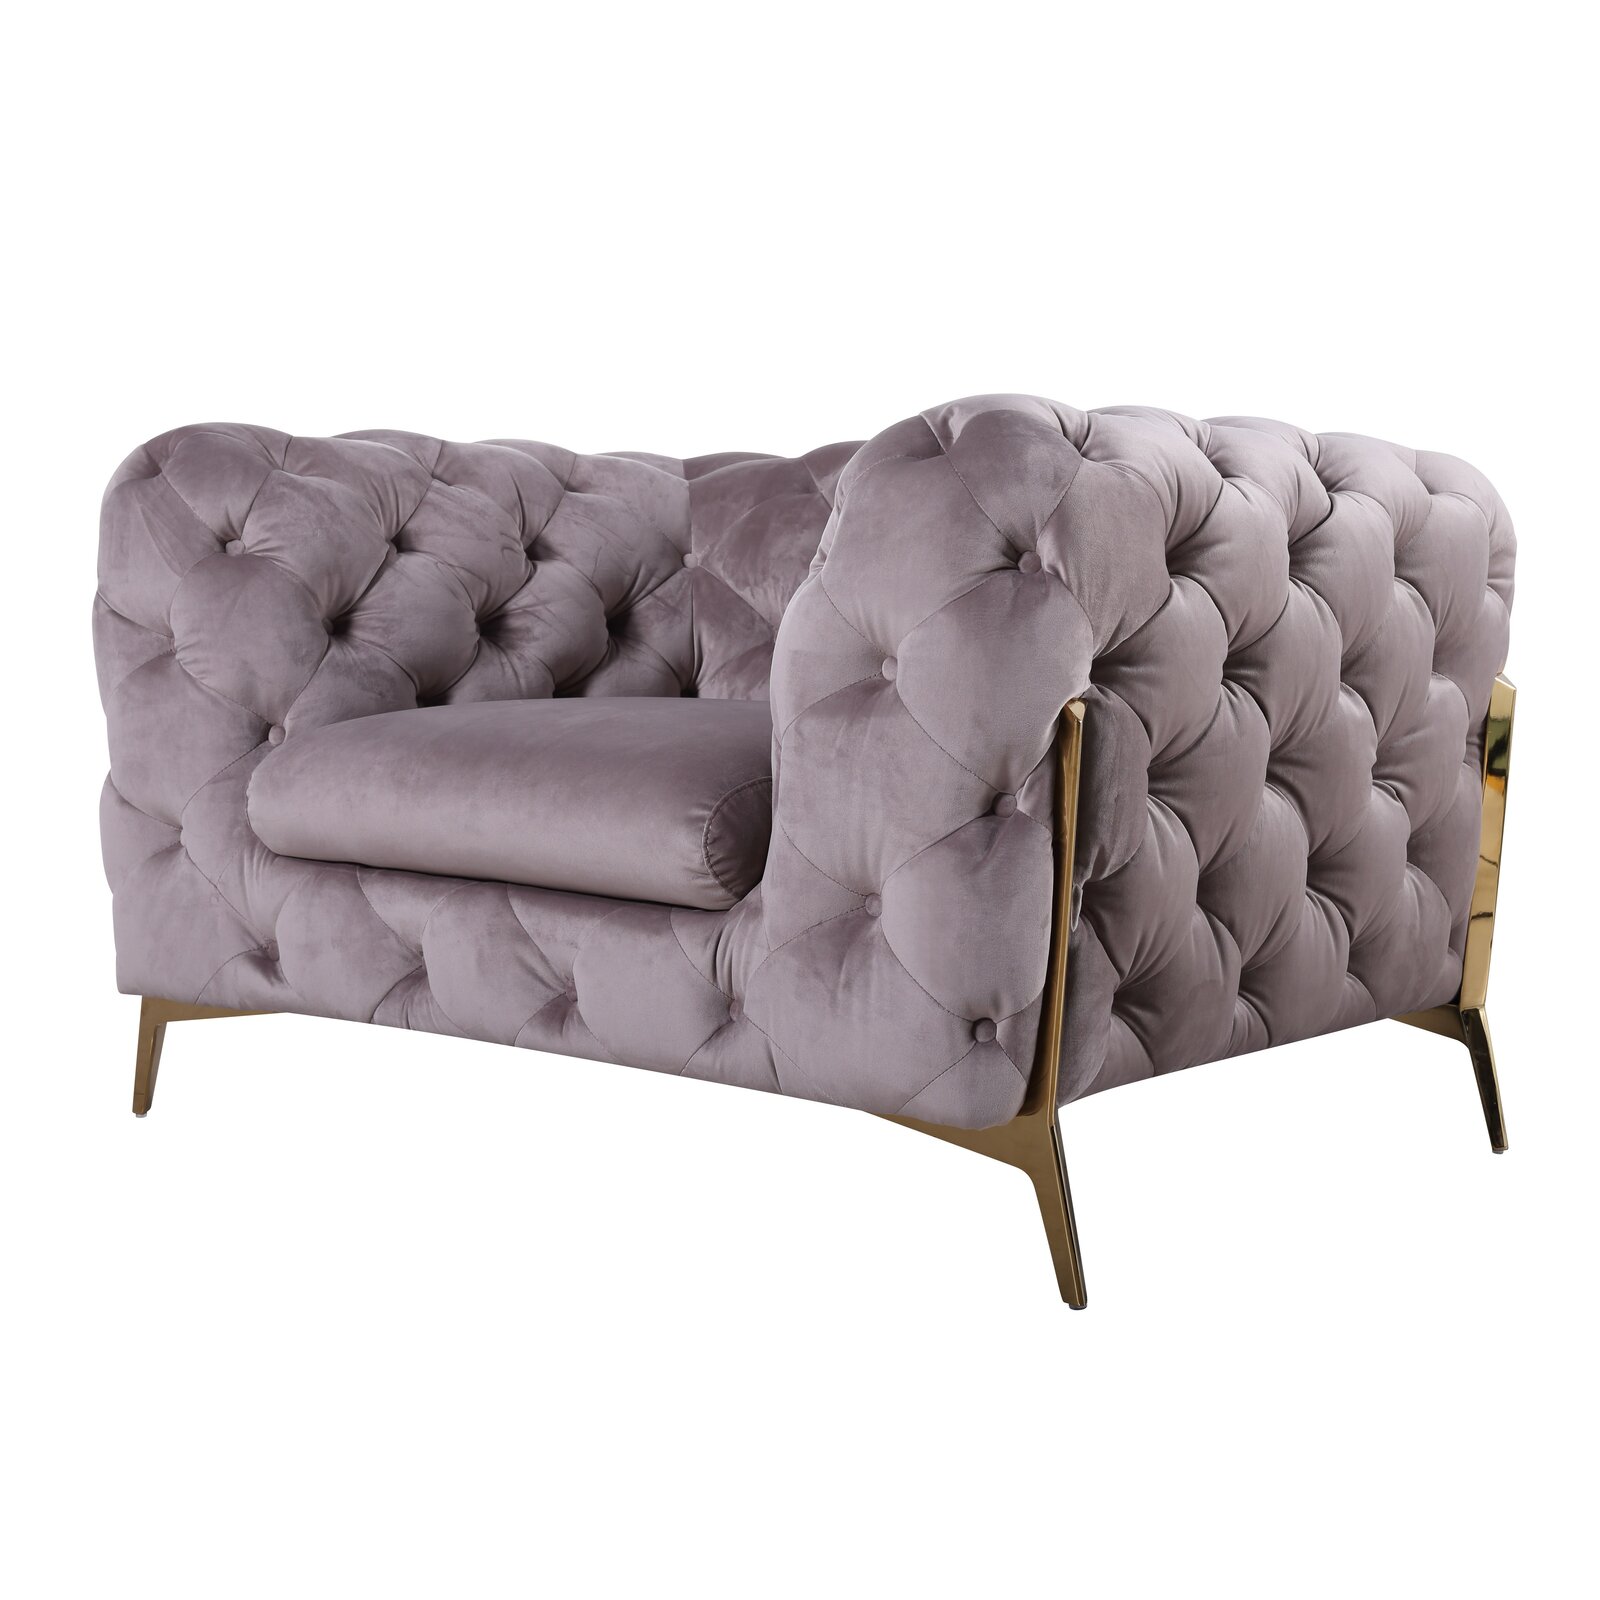 Everly Quinn Anika Upholstered Armchair & Reviews